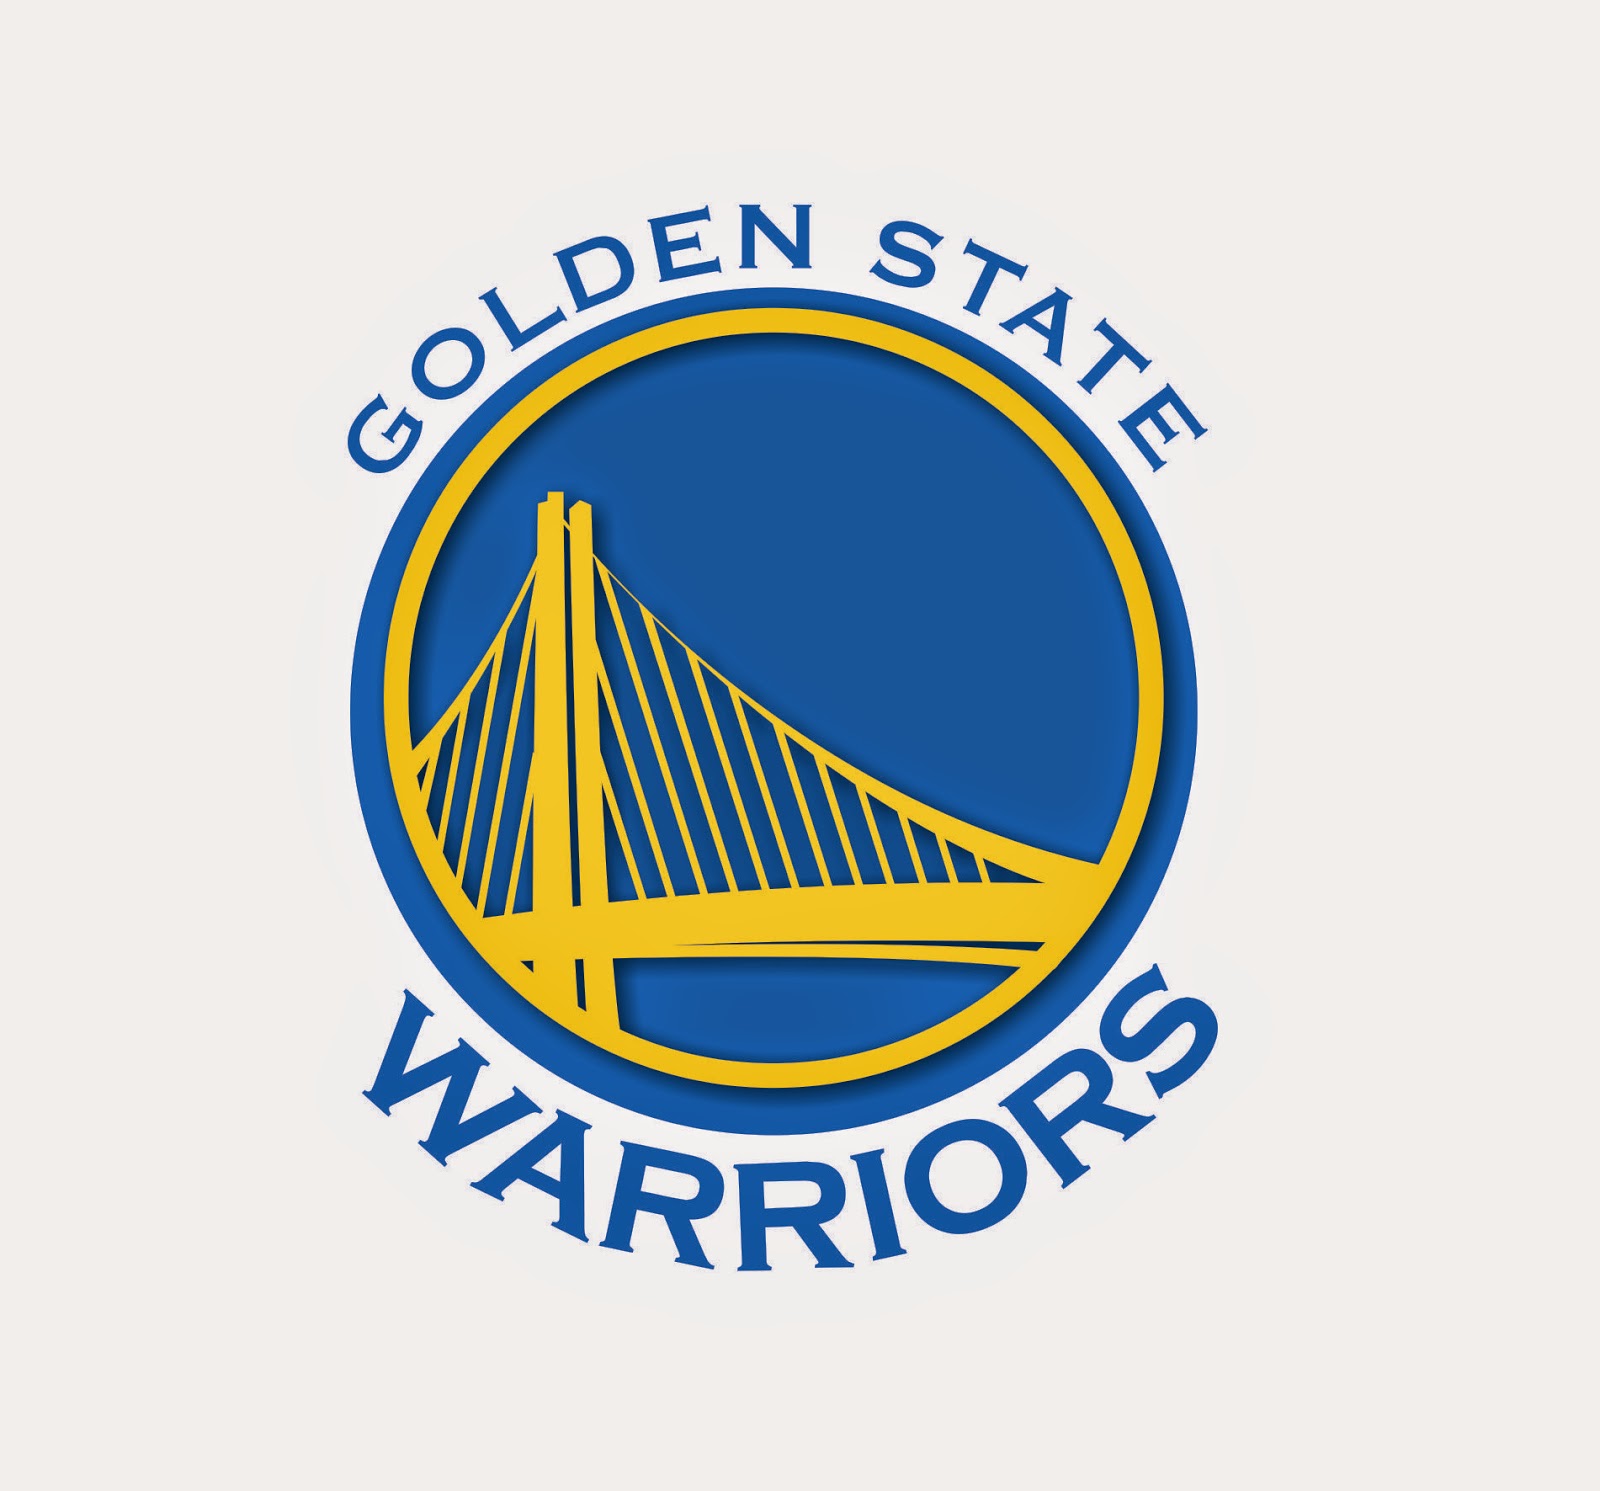 The Golden State Warriors Are An American Professional Basketball Team